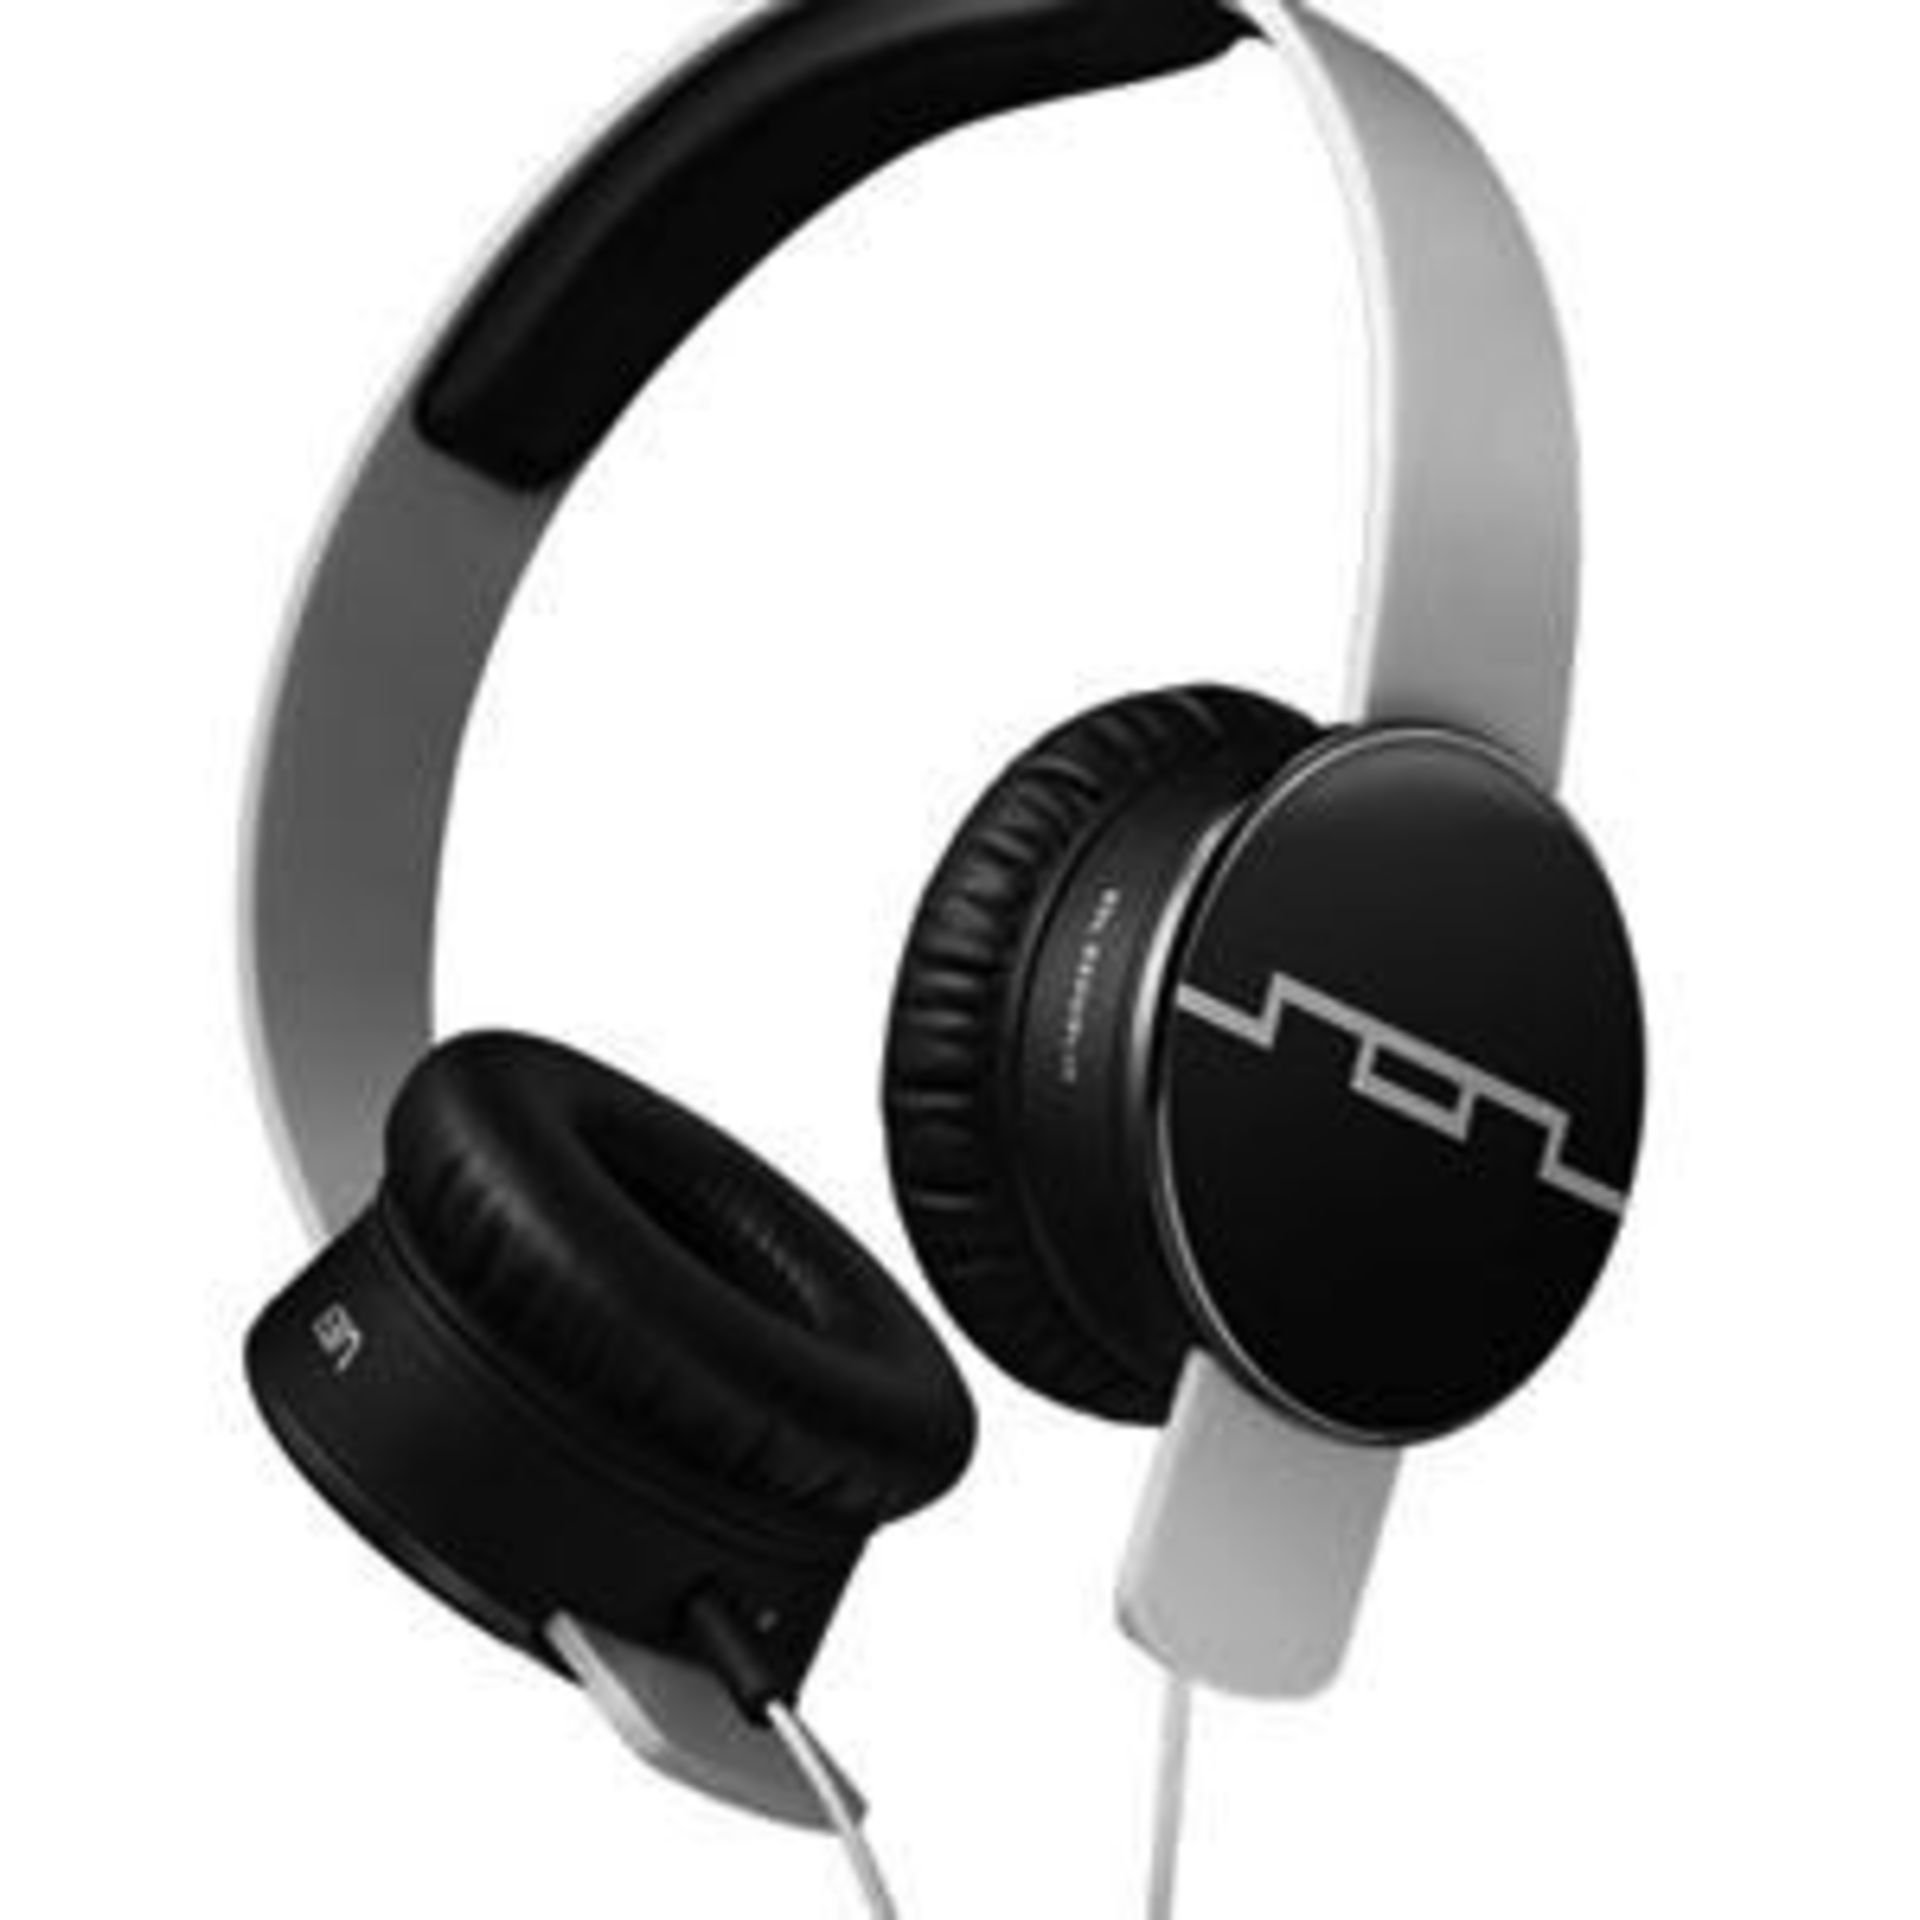 V Brand New Sol Republic Tracks V8 White - ISP £82.20 (Mobicity.co.uk) - With Sonic Ear Cushions -